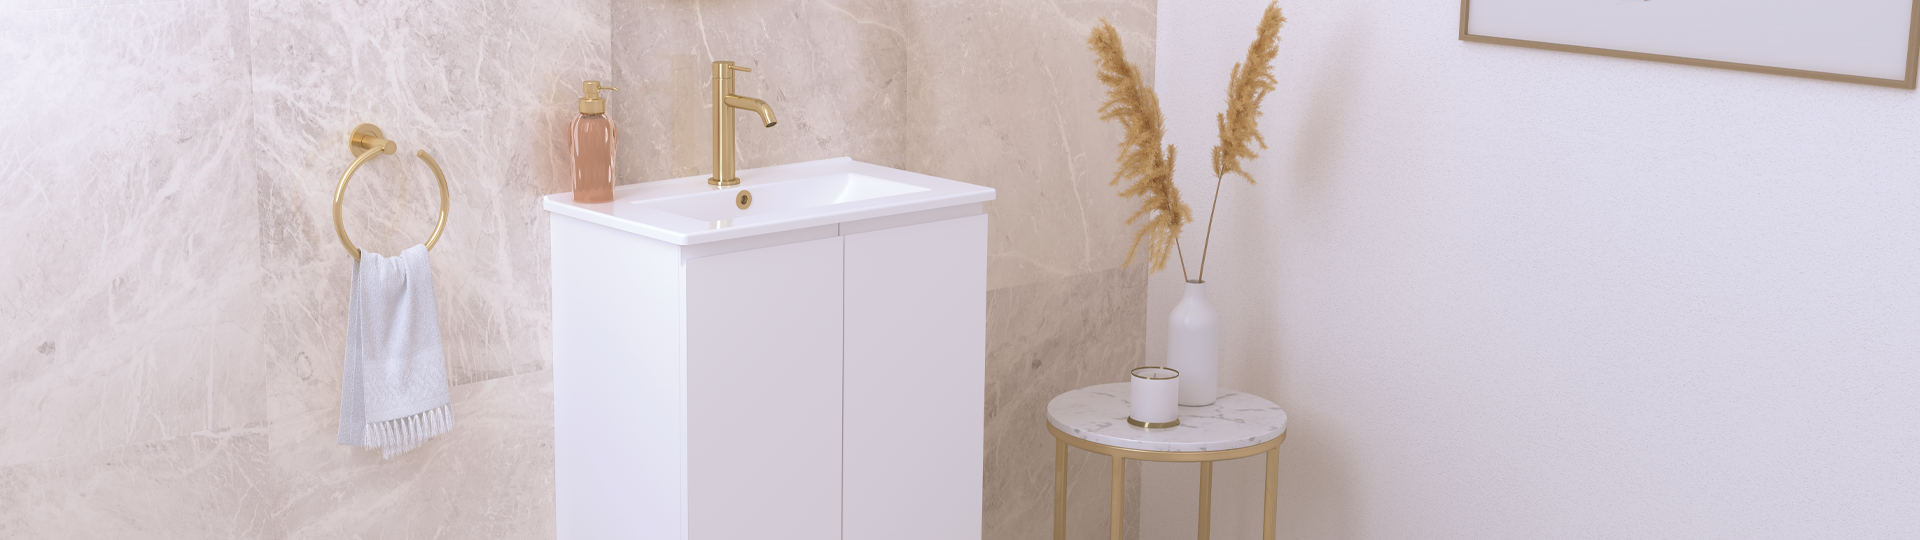 Bathroom with white vanity and gold tapware